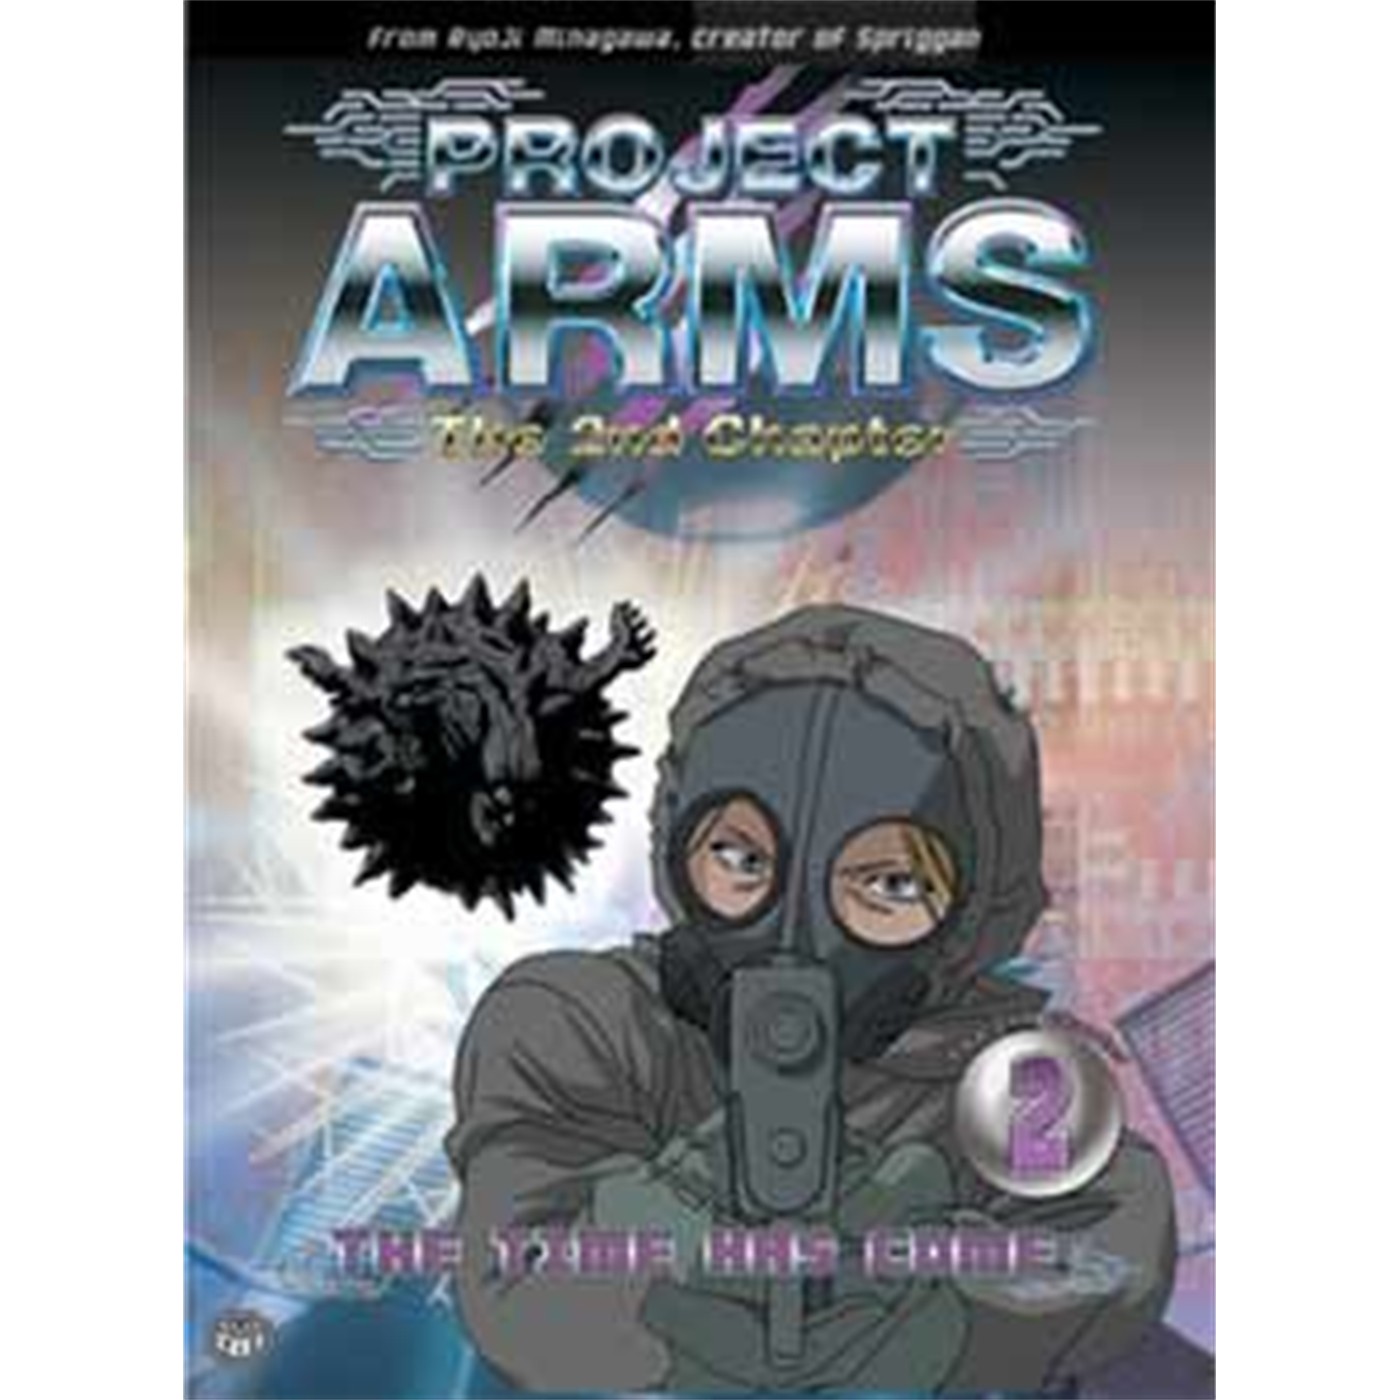 PROJECT ARMS, Vol. 11 (DVD)